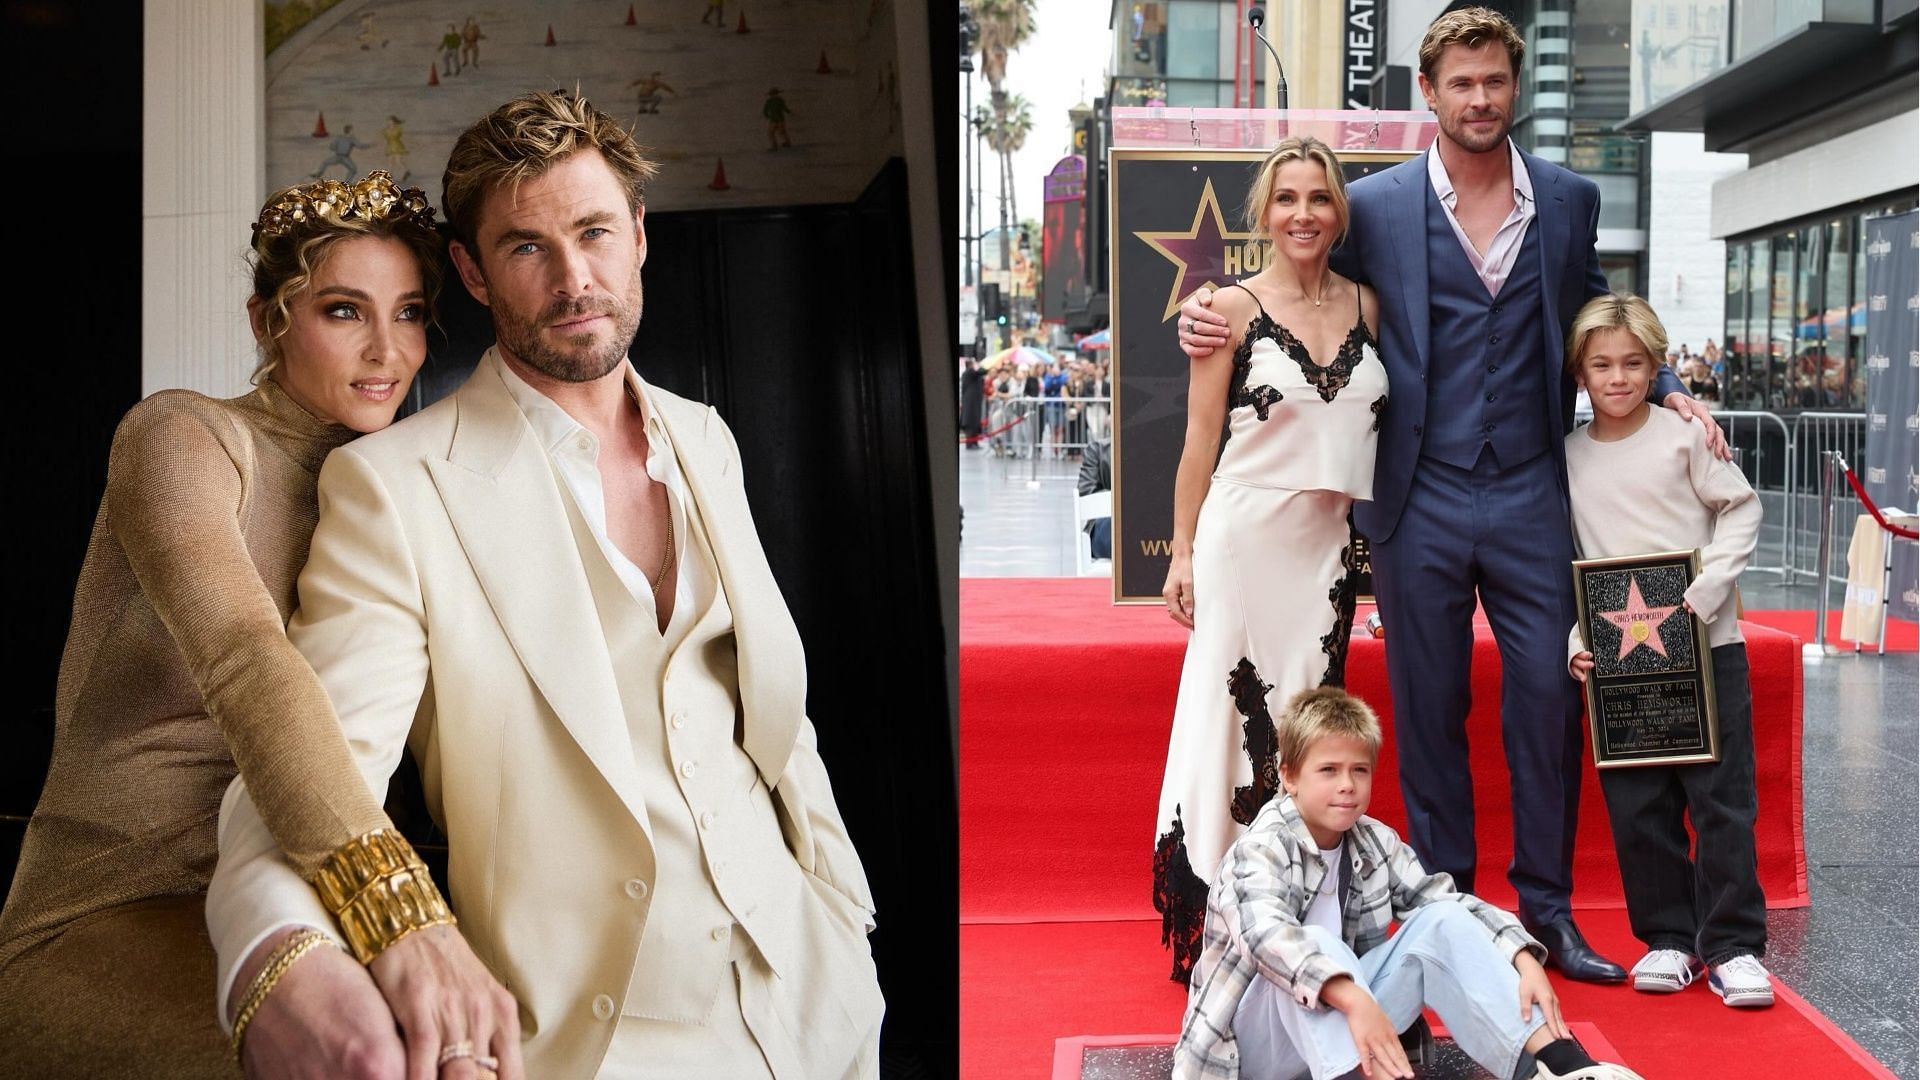 Chris Hemsworth praised his wife after being honored with a Hollywood Walk of Fame star (Image via Instagram/@elsapataky)